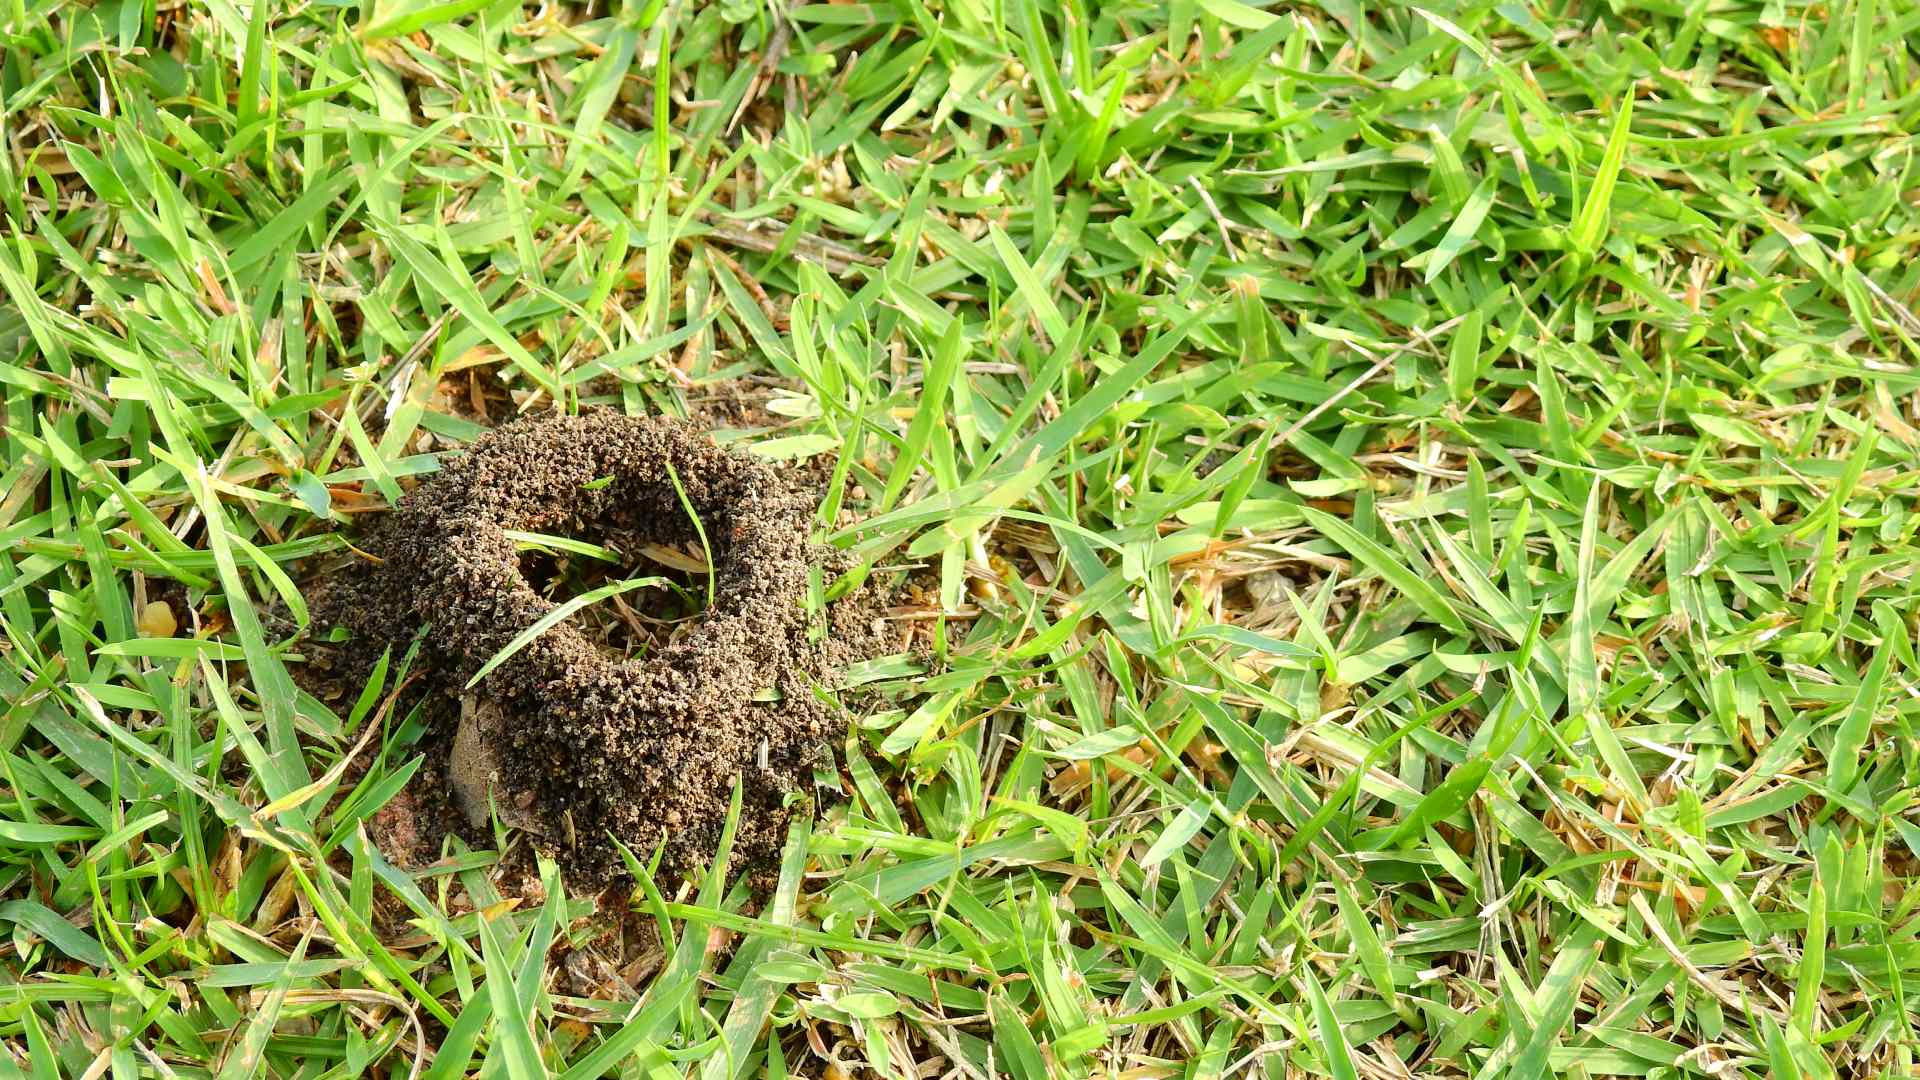 Ant hill found in lawn in Sachse, TX.